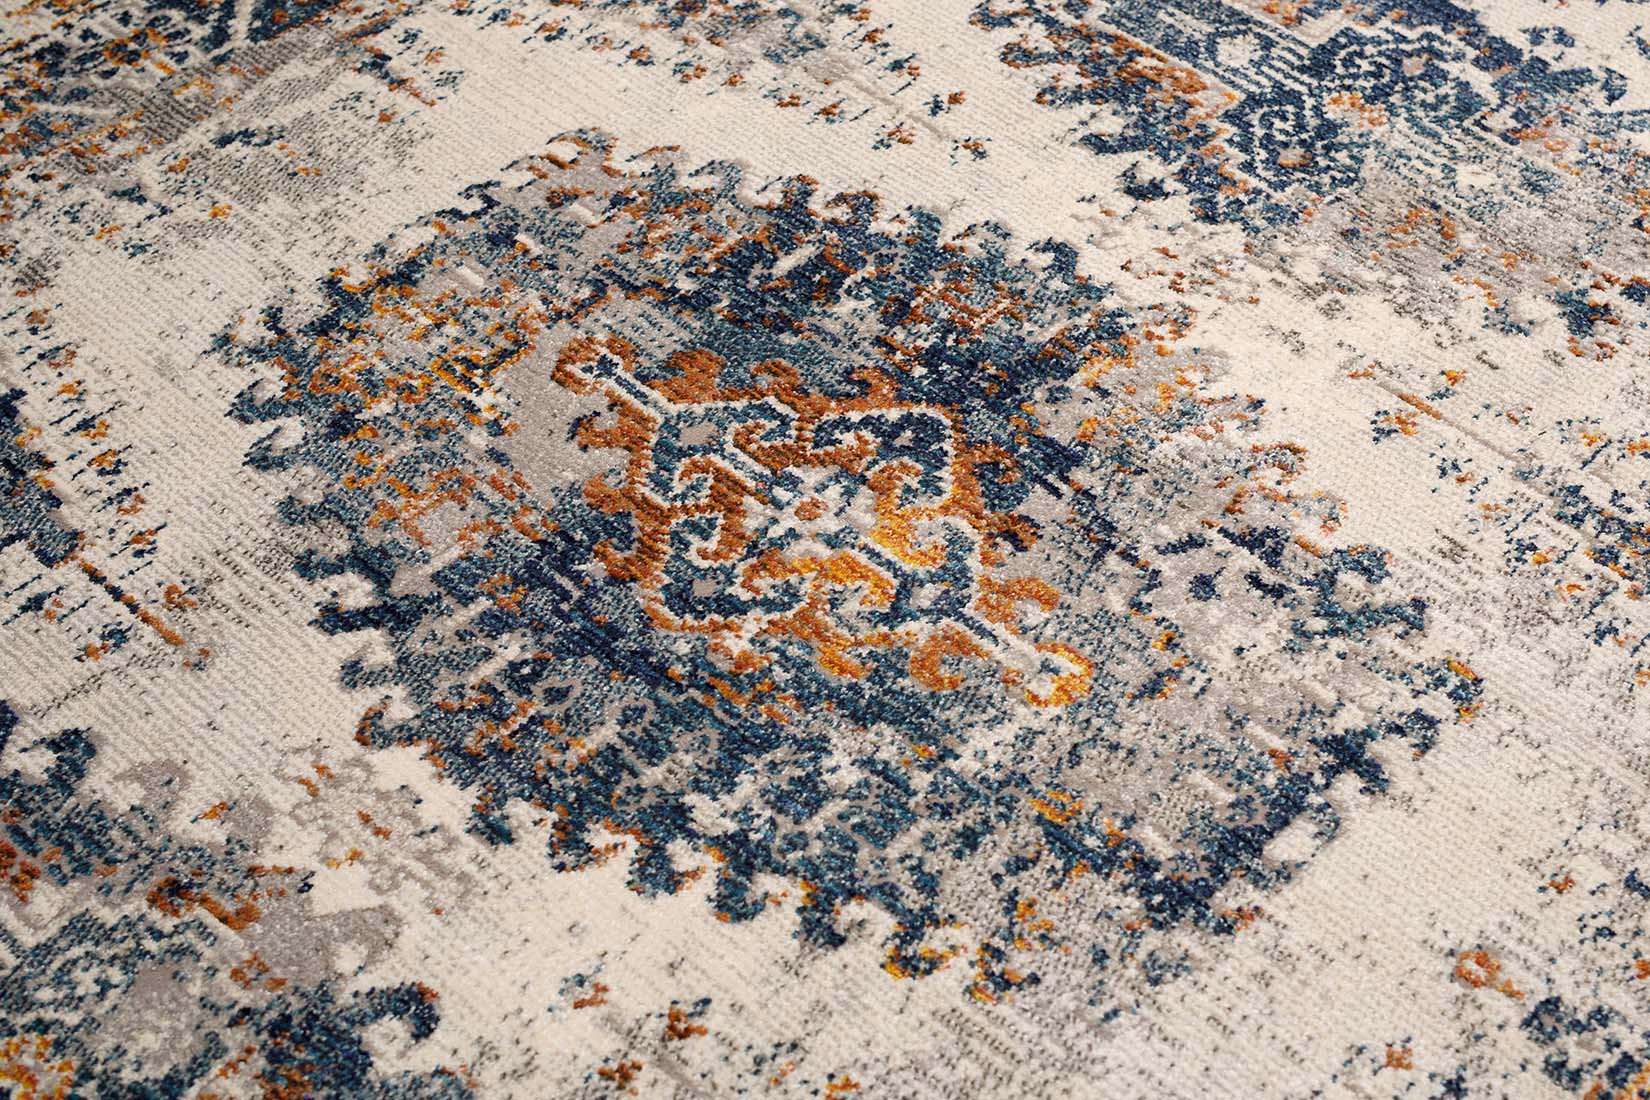 aztec style area rug in blue